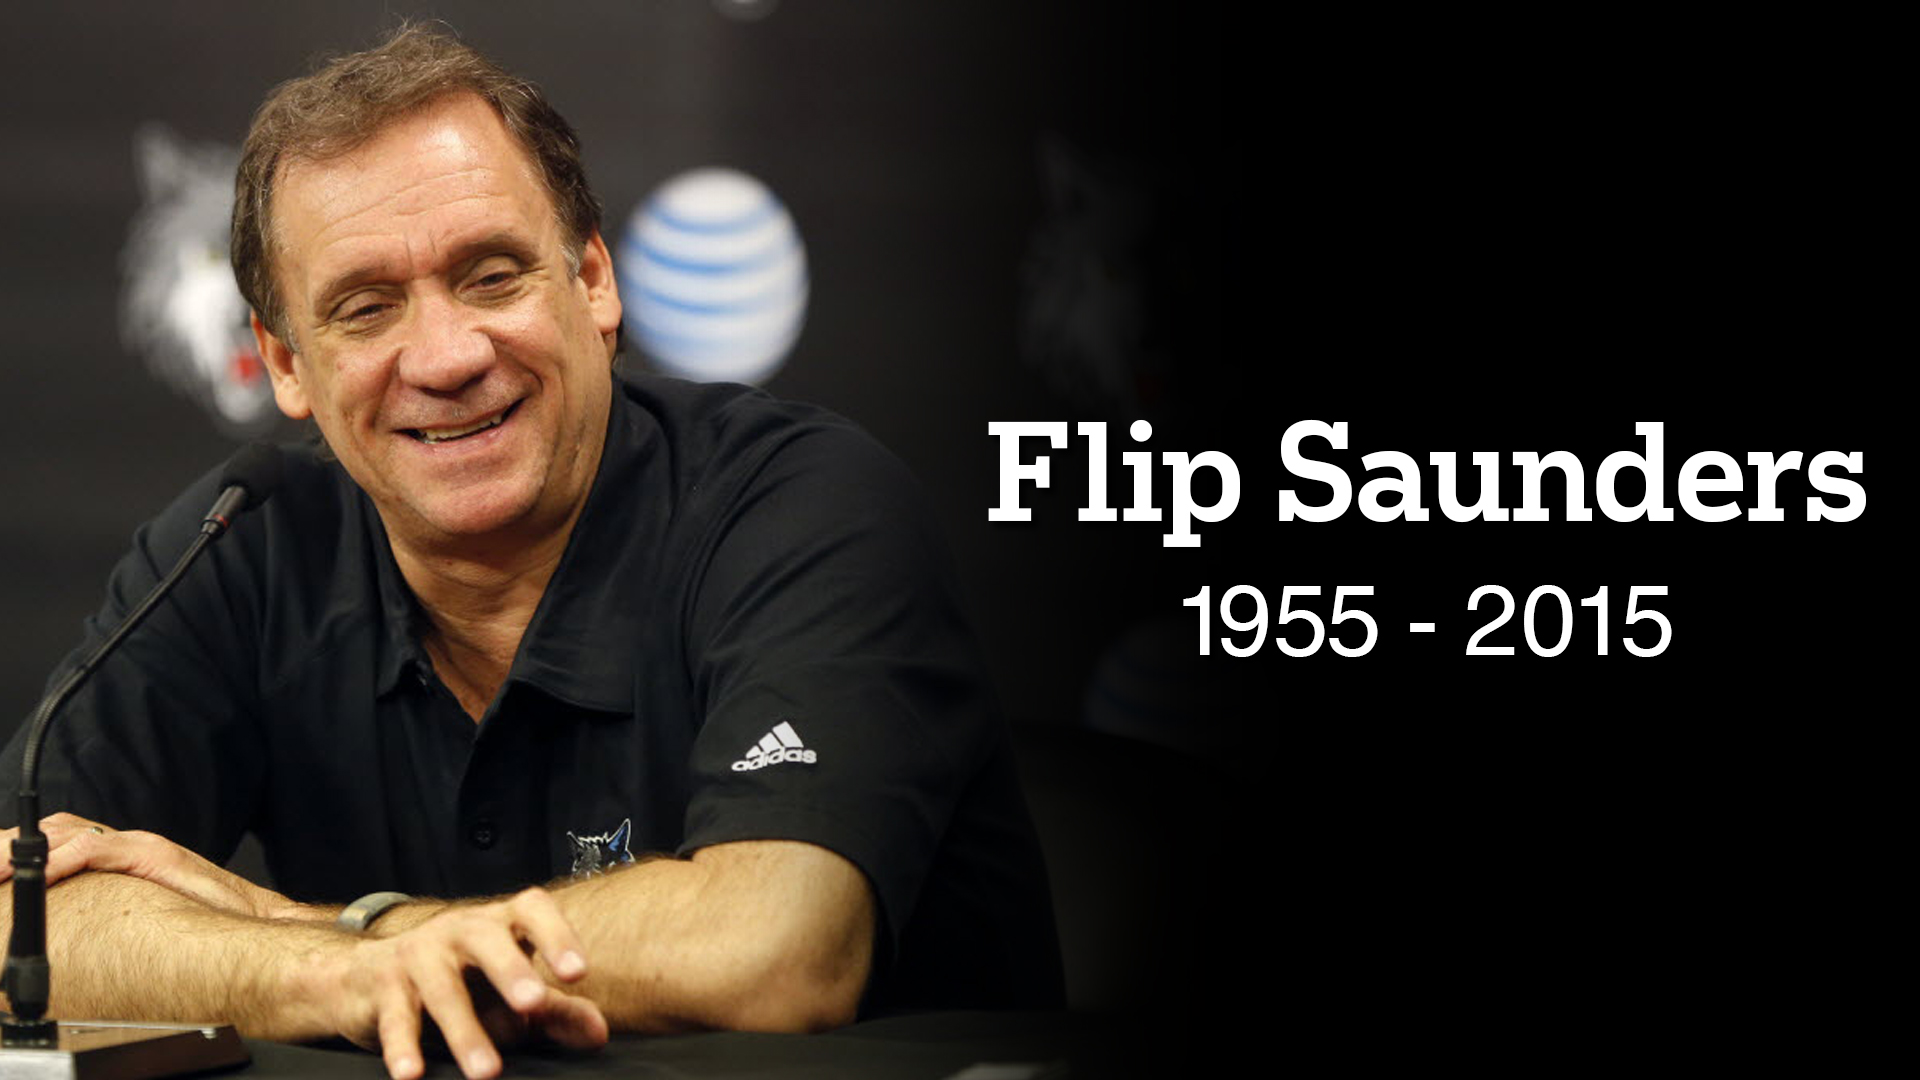 Watch video clips of Flip Saunders talking with reporters from the past two years and see why he was a beloved coach and friend.